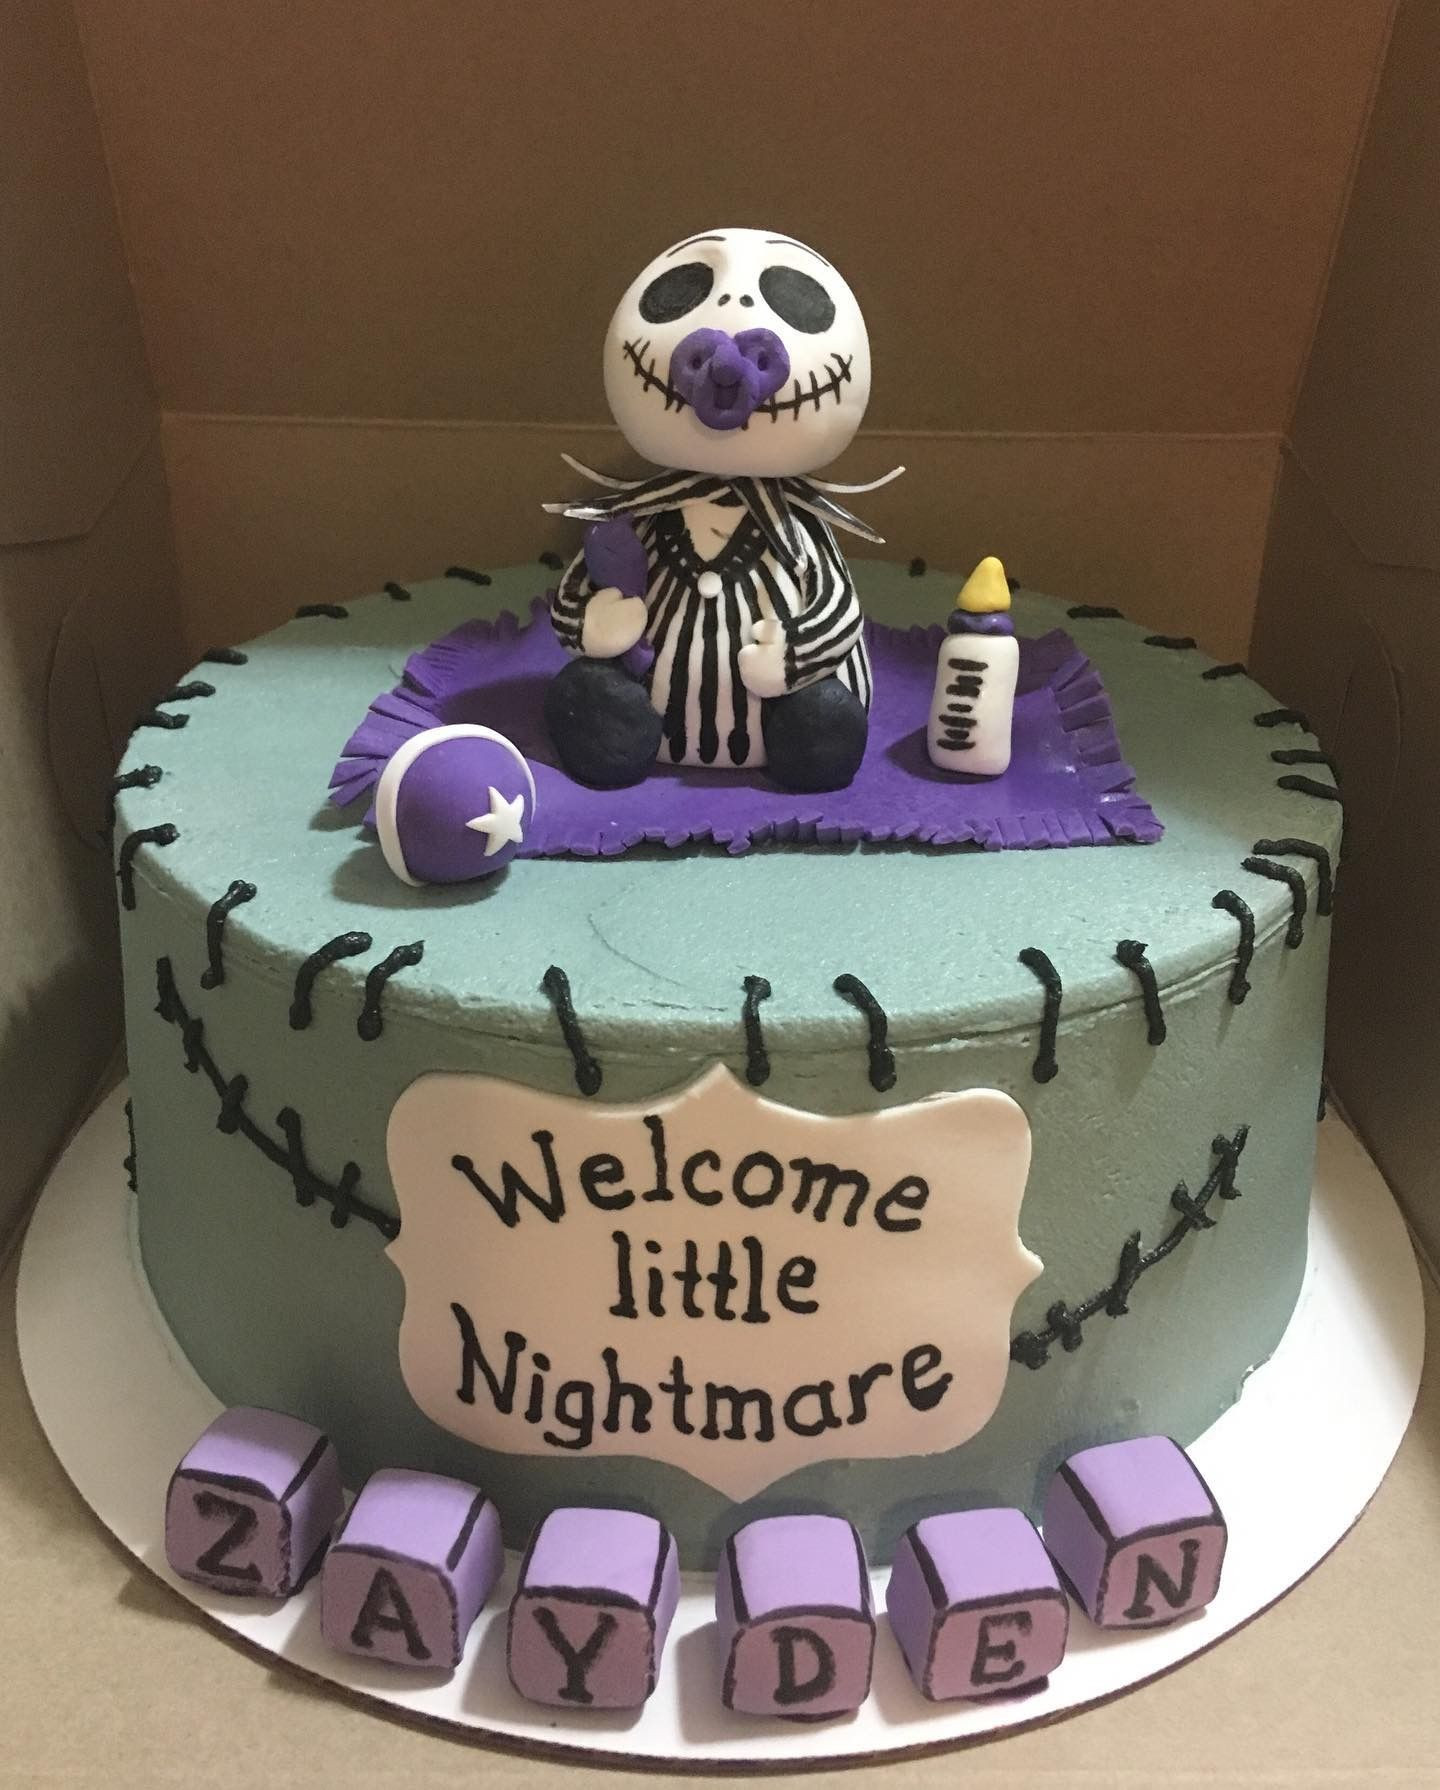 All Time top 15 Nightmare before Christmas Baby Shower Cakes